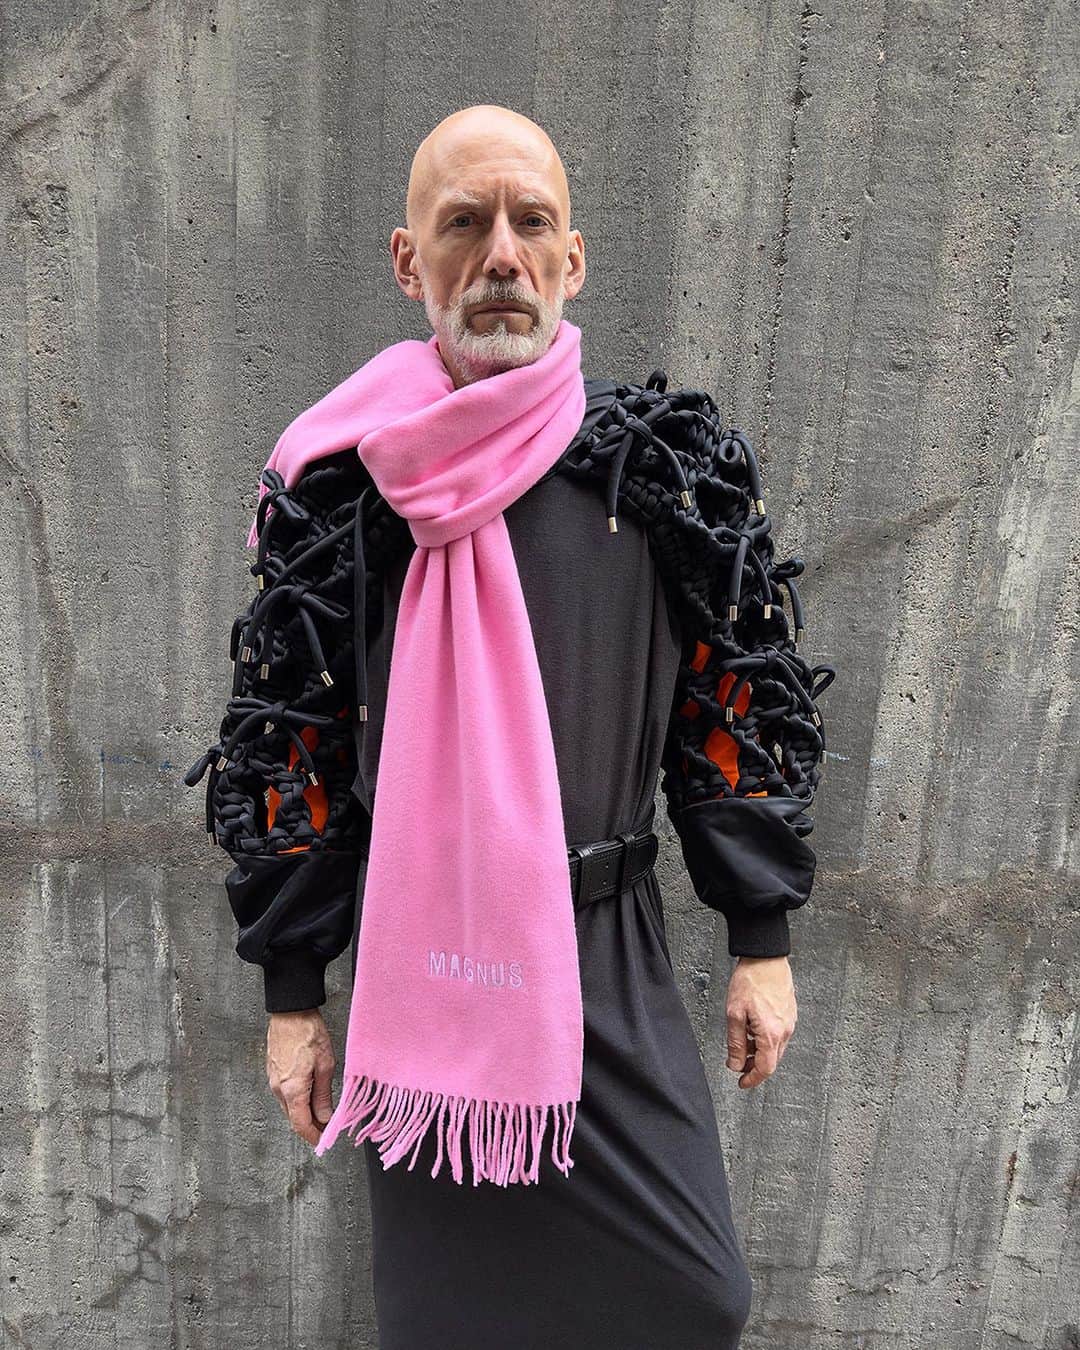 Acne Studiosのインスタグラム：「Personalise it! Our very own Magnus Carlsson (@Magnuscc) captured at Floragatan 13 wearing his personalised #AcneStudios scarf. Discover our personalisation service in store and online.   #InsideFloragatan」